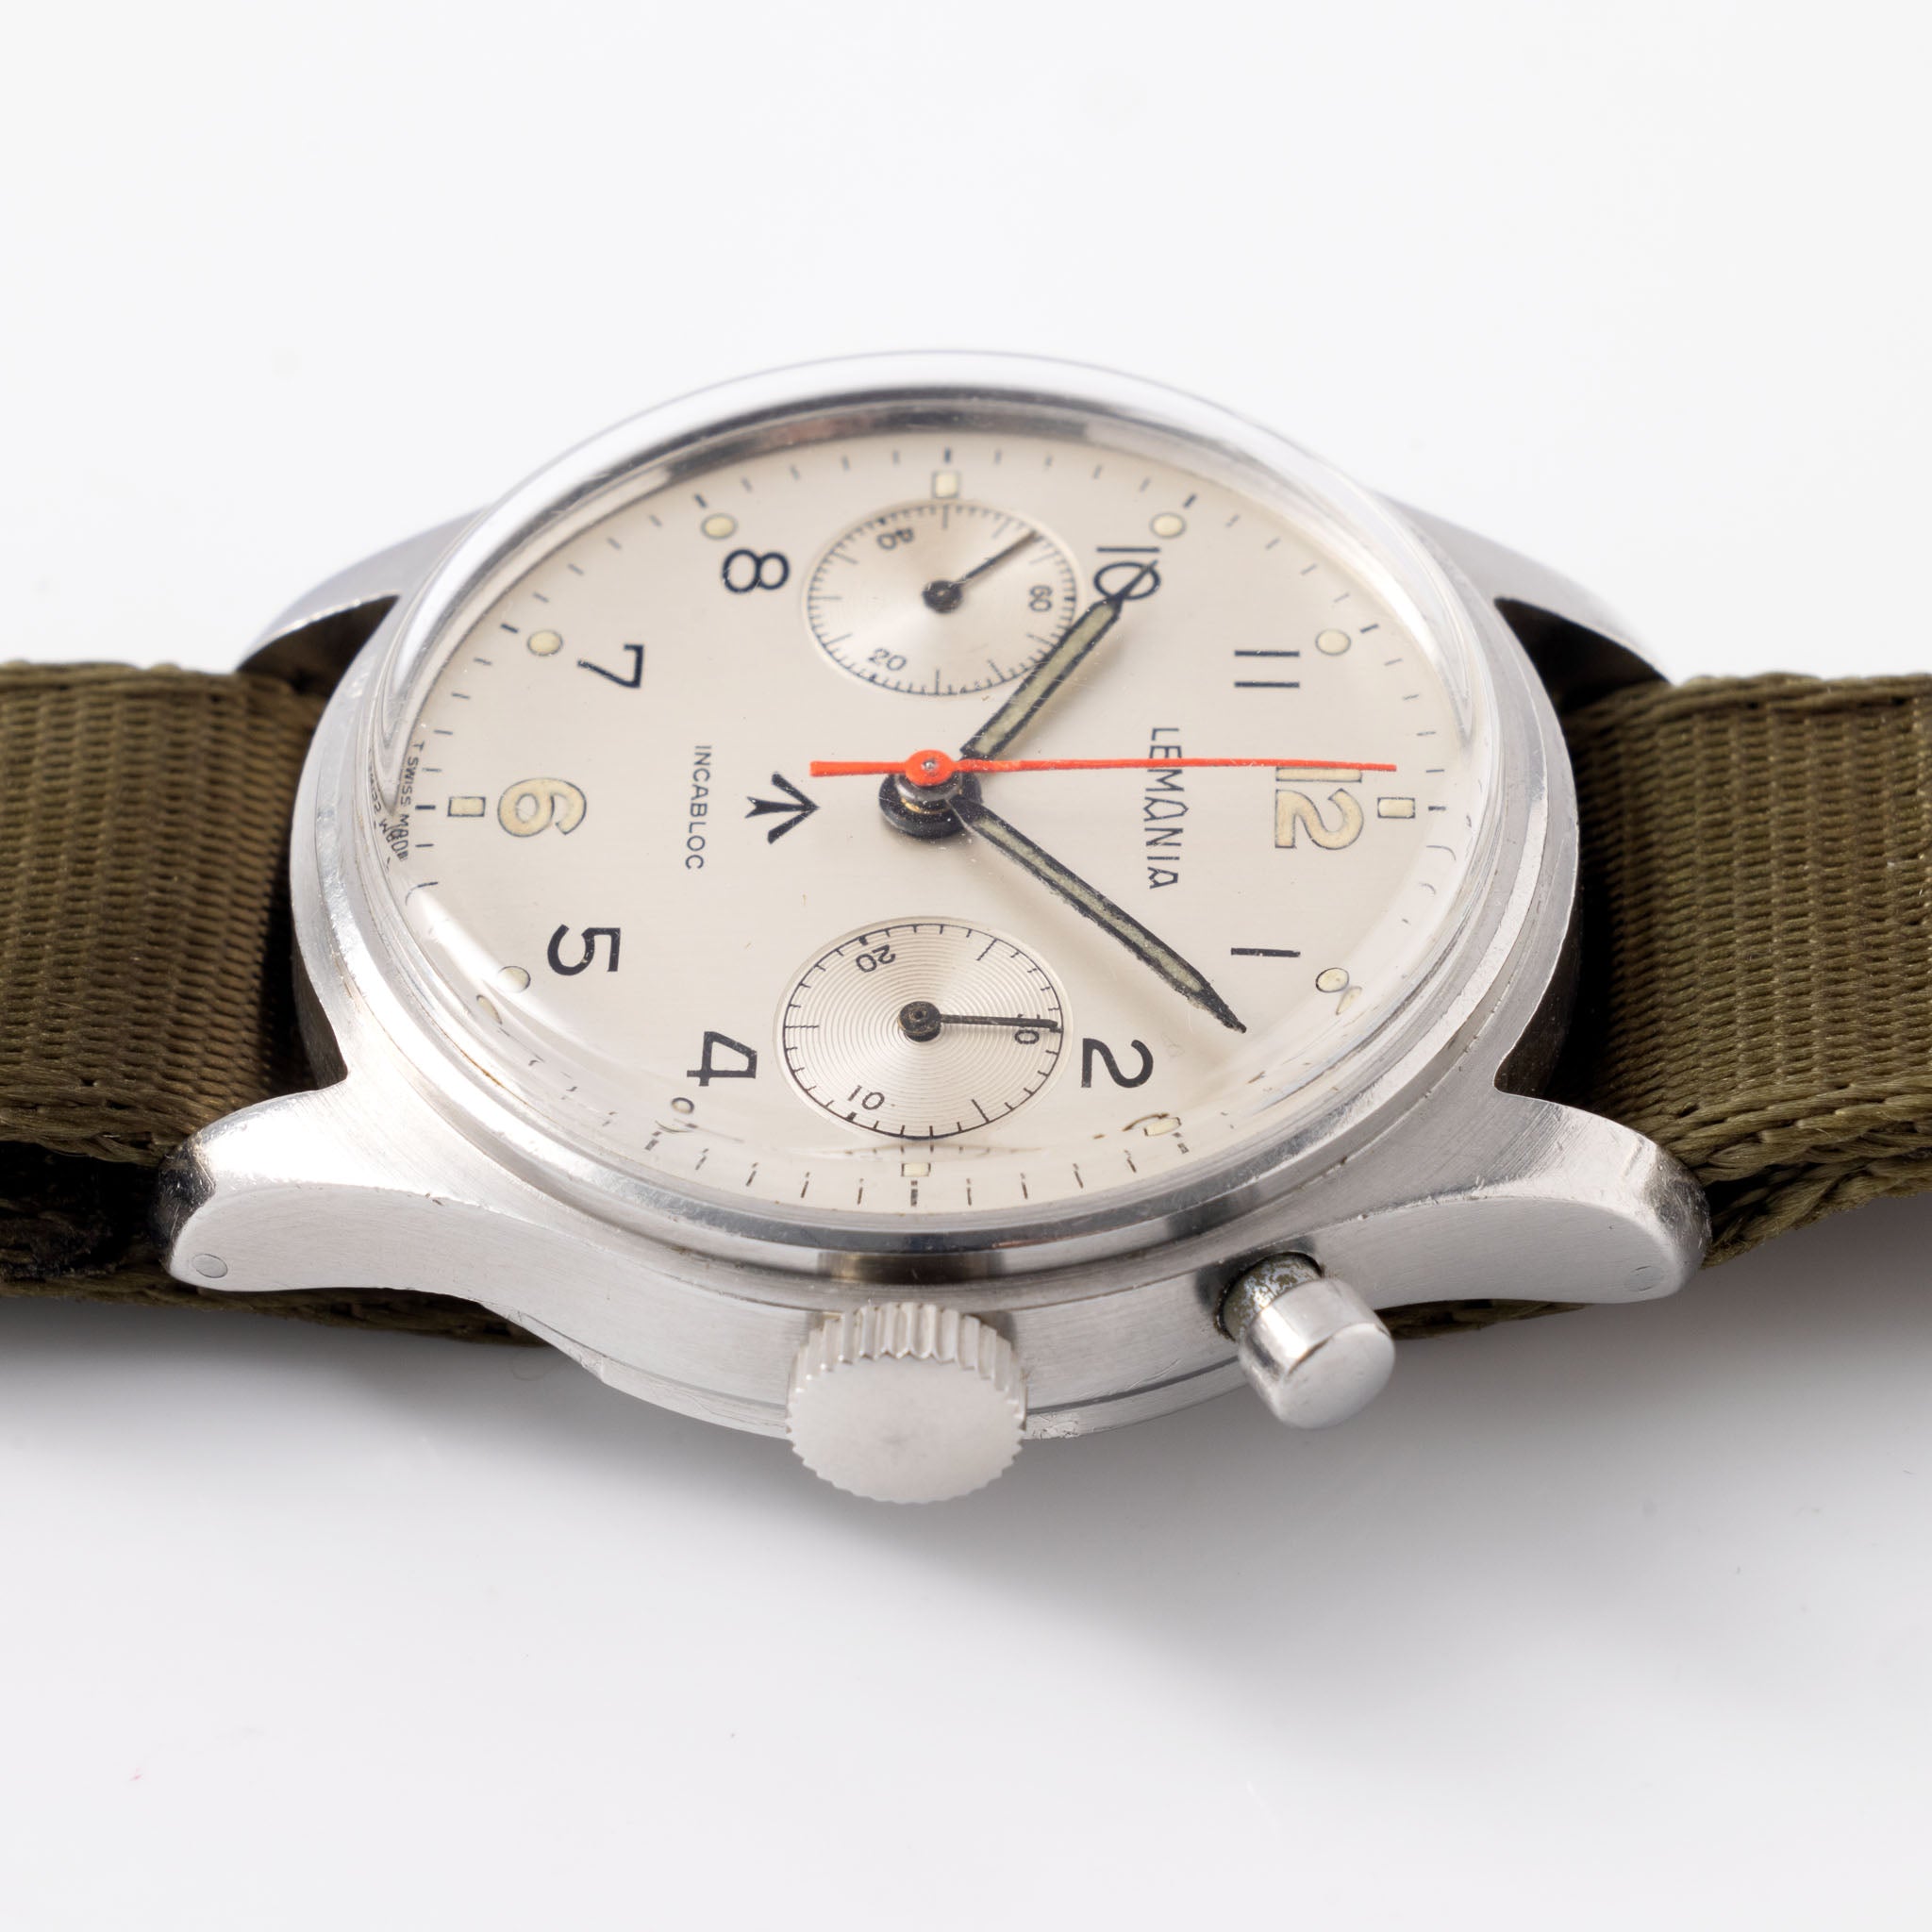 Lemania Monopusher Chronograph British Armed Forces